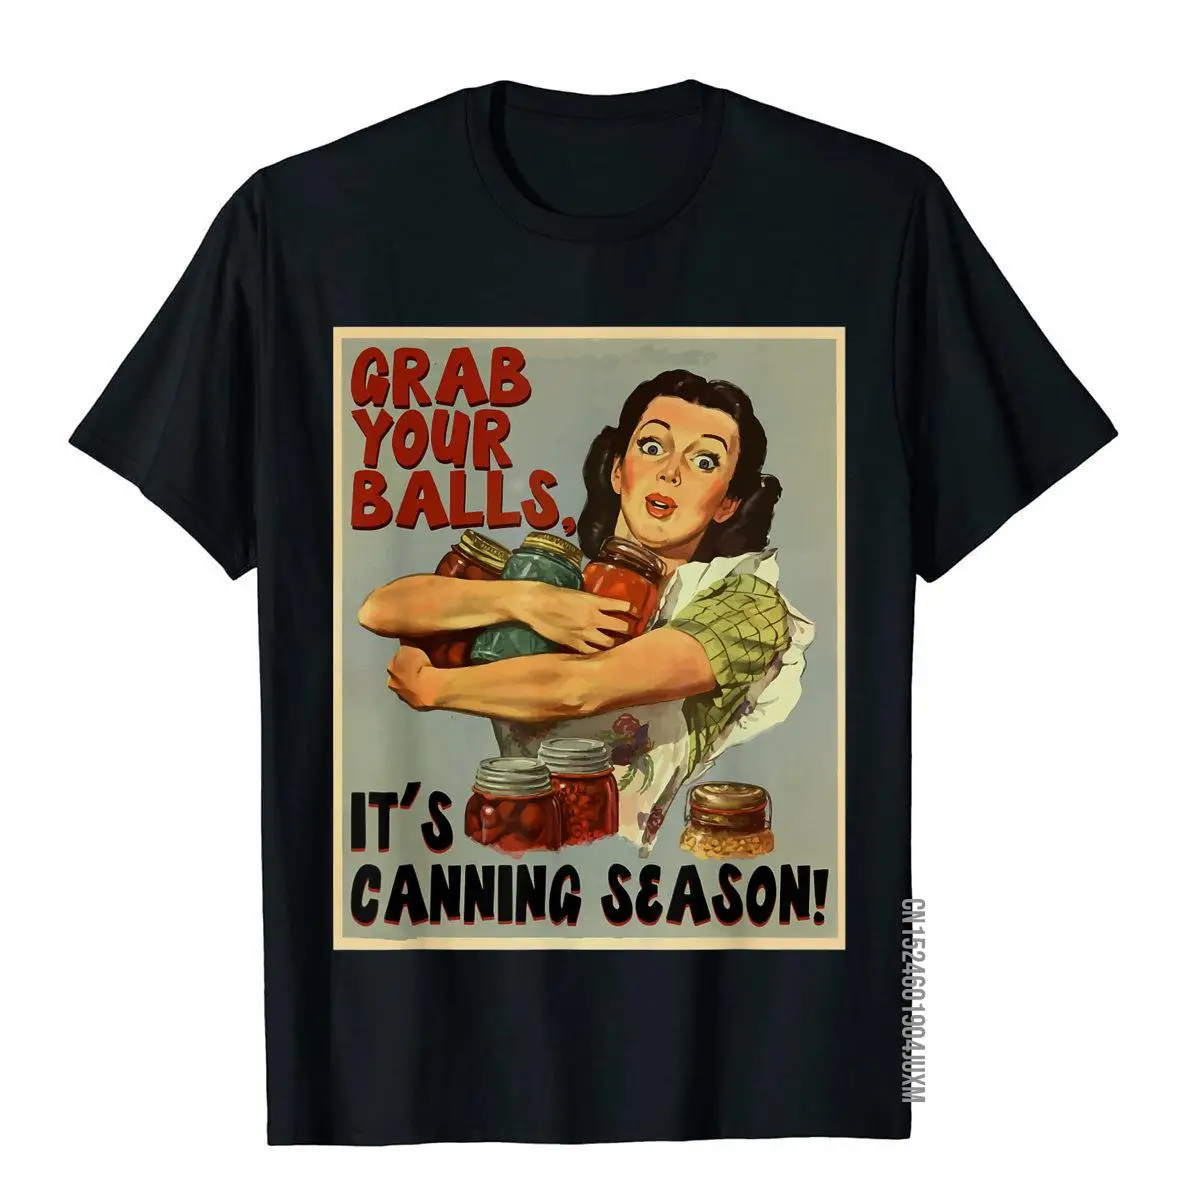 

Grab Your Balls It's Canning Season T-Shirt T Shirt For Men Crazy Tees New Design Japan Style Cotton